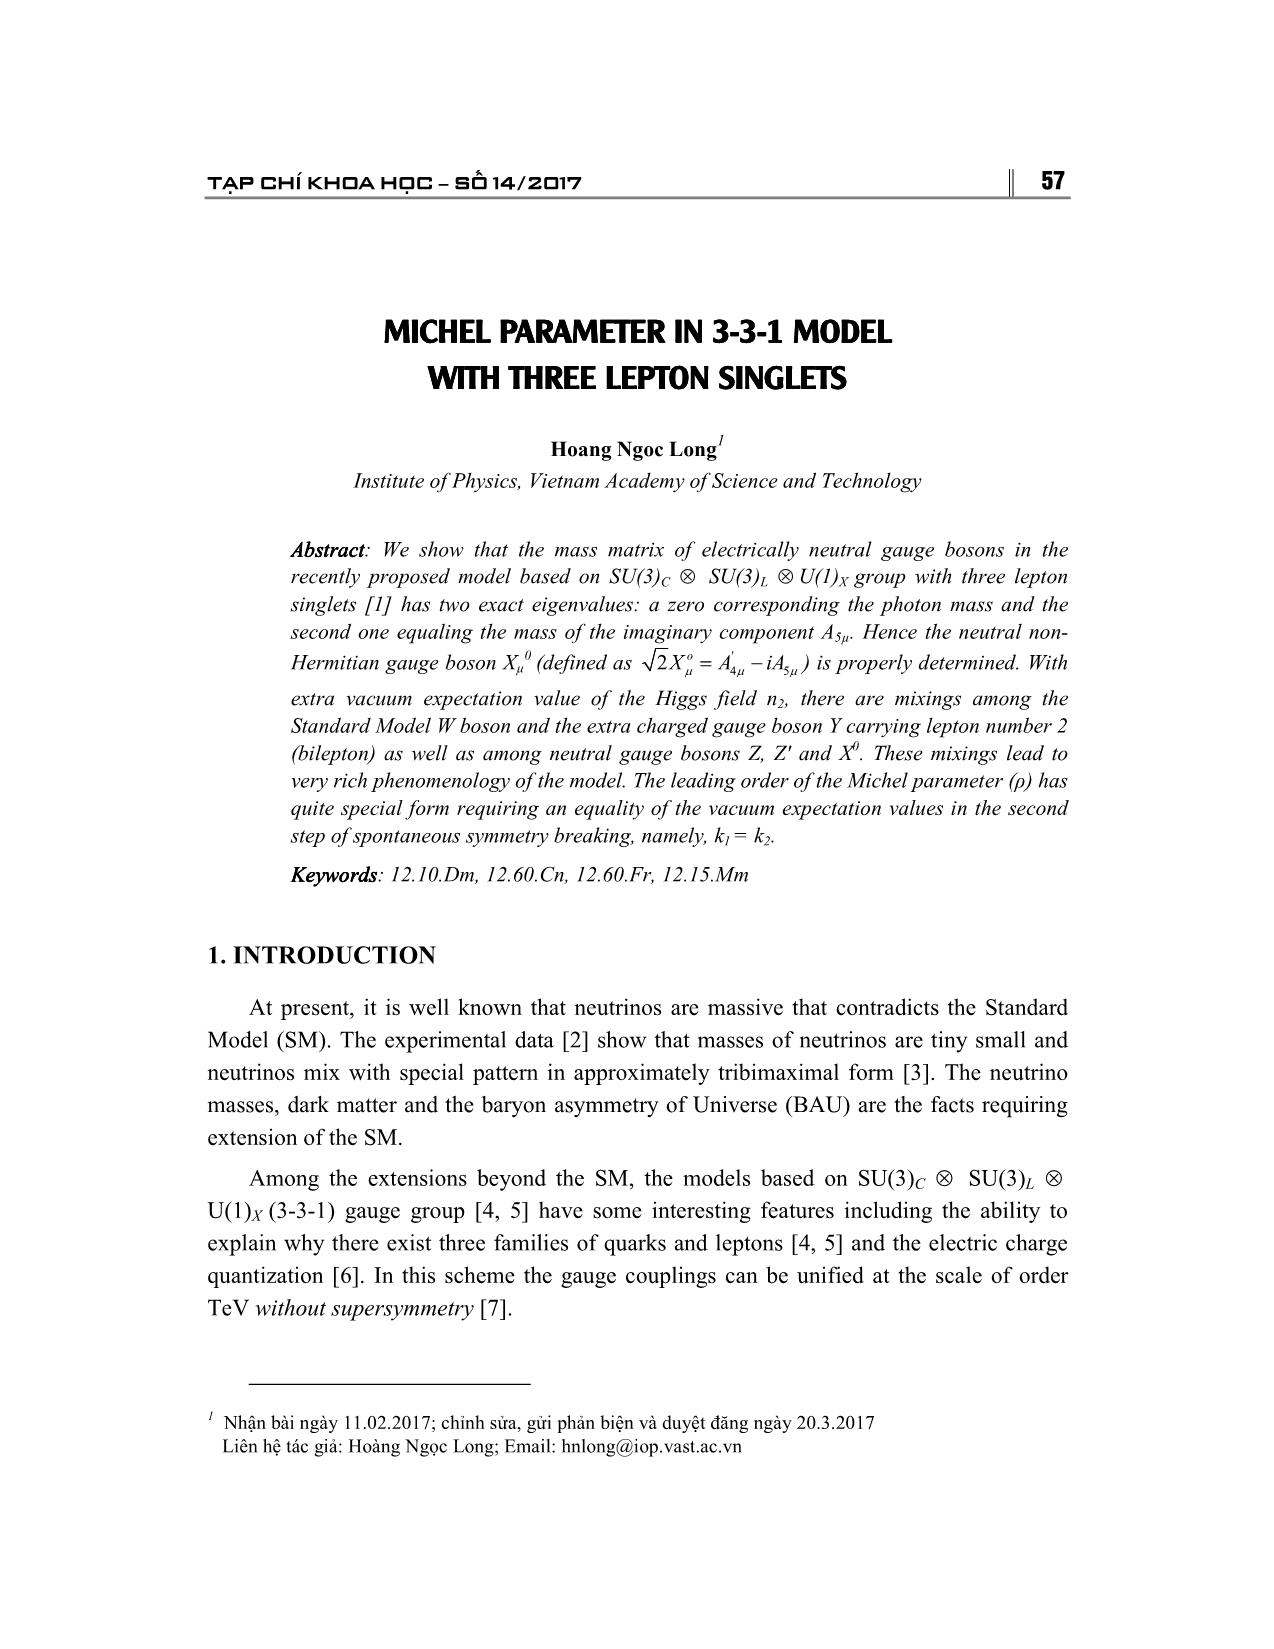 Michel parameter in 3-3-1 model with three lepton singlets trang 1